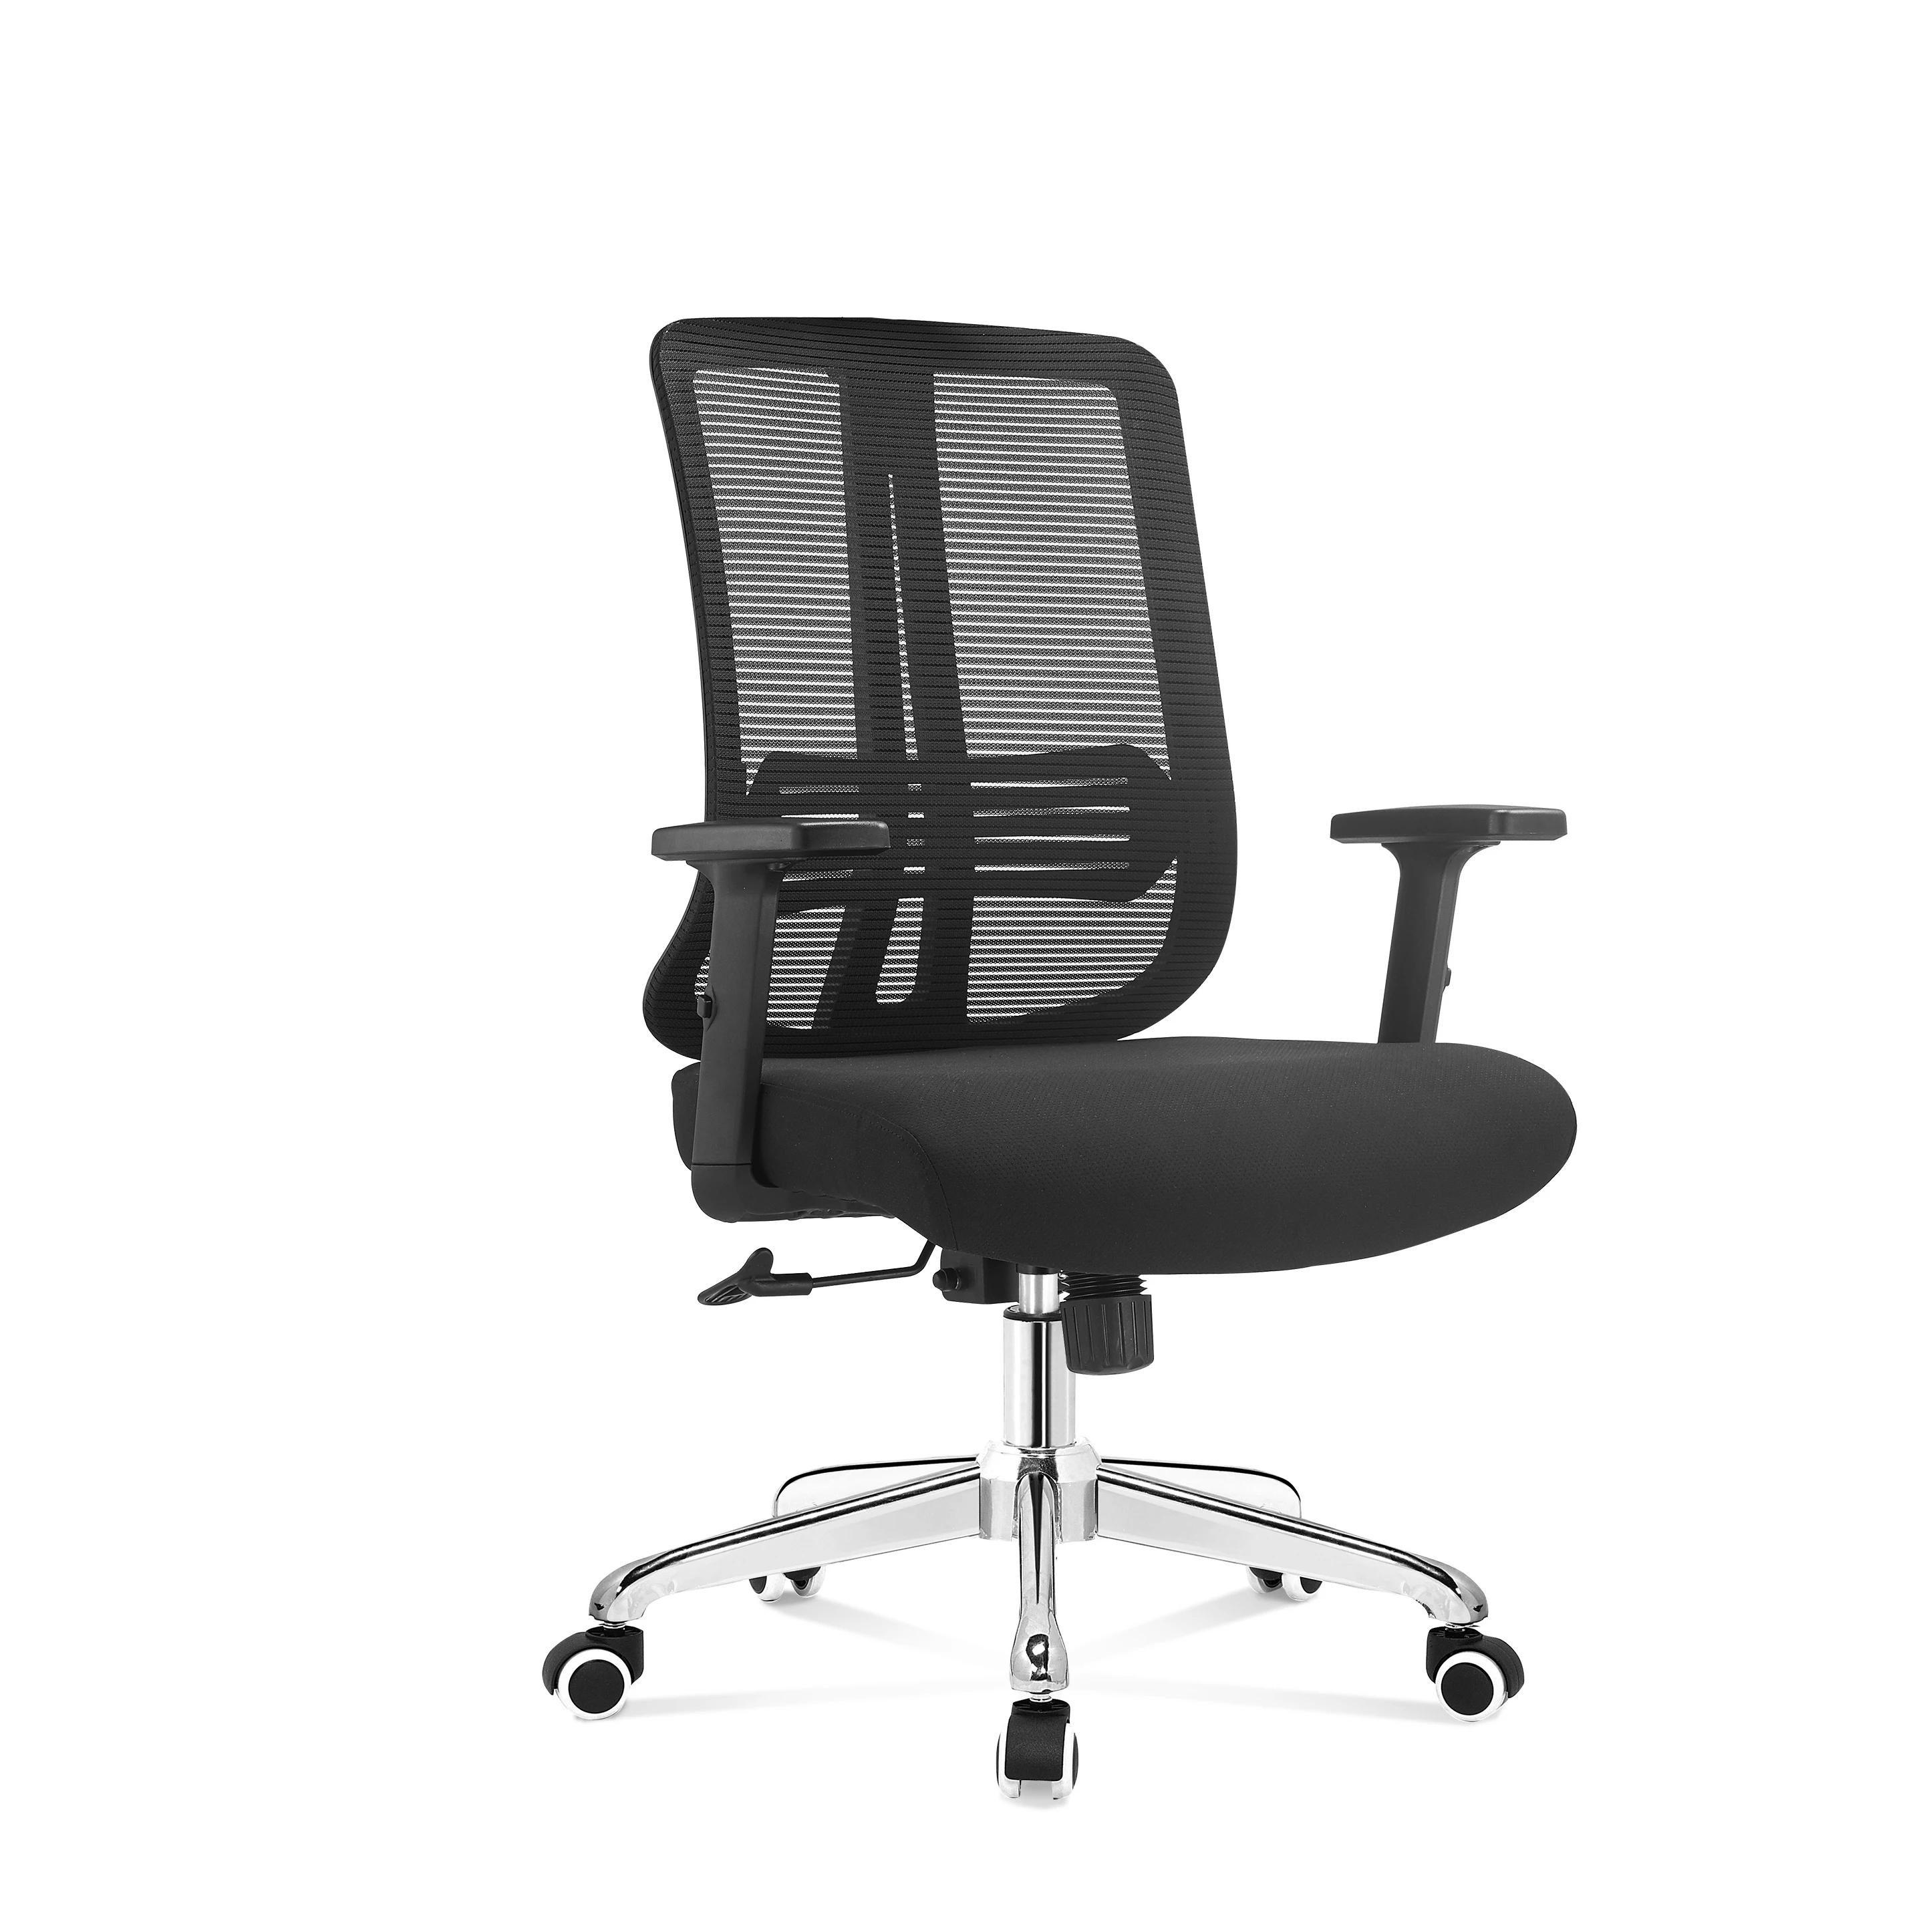 High Back Fixed Armrest Executive Office High Adjust Mesh Chairs With Lumbar Support Buy High Back Fixed Armrest Chairs Executive Office Chair With Lumbar Support Mesh Chair With High Adjust Product On Alibaba Com